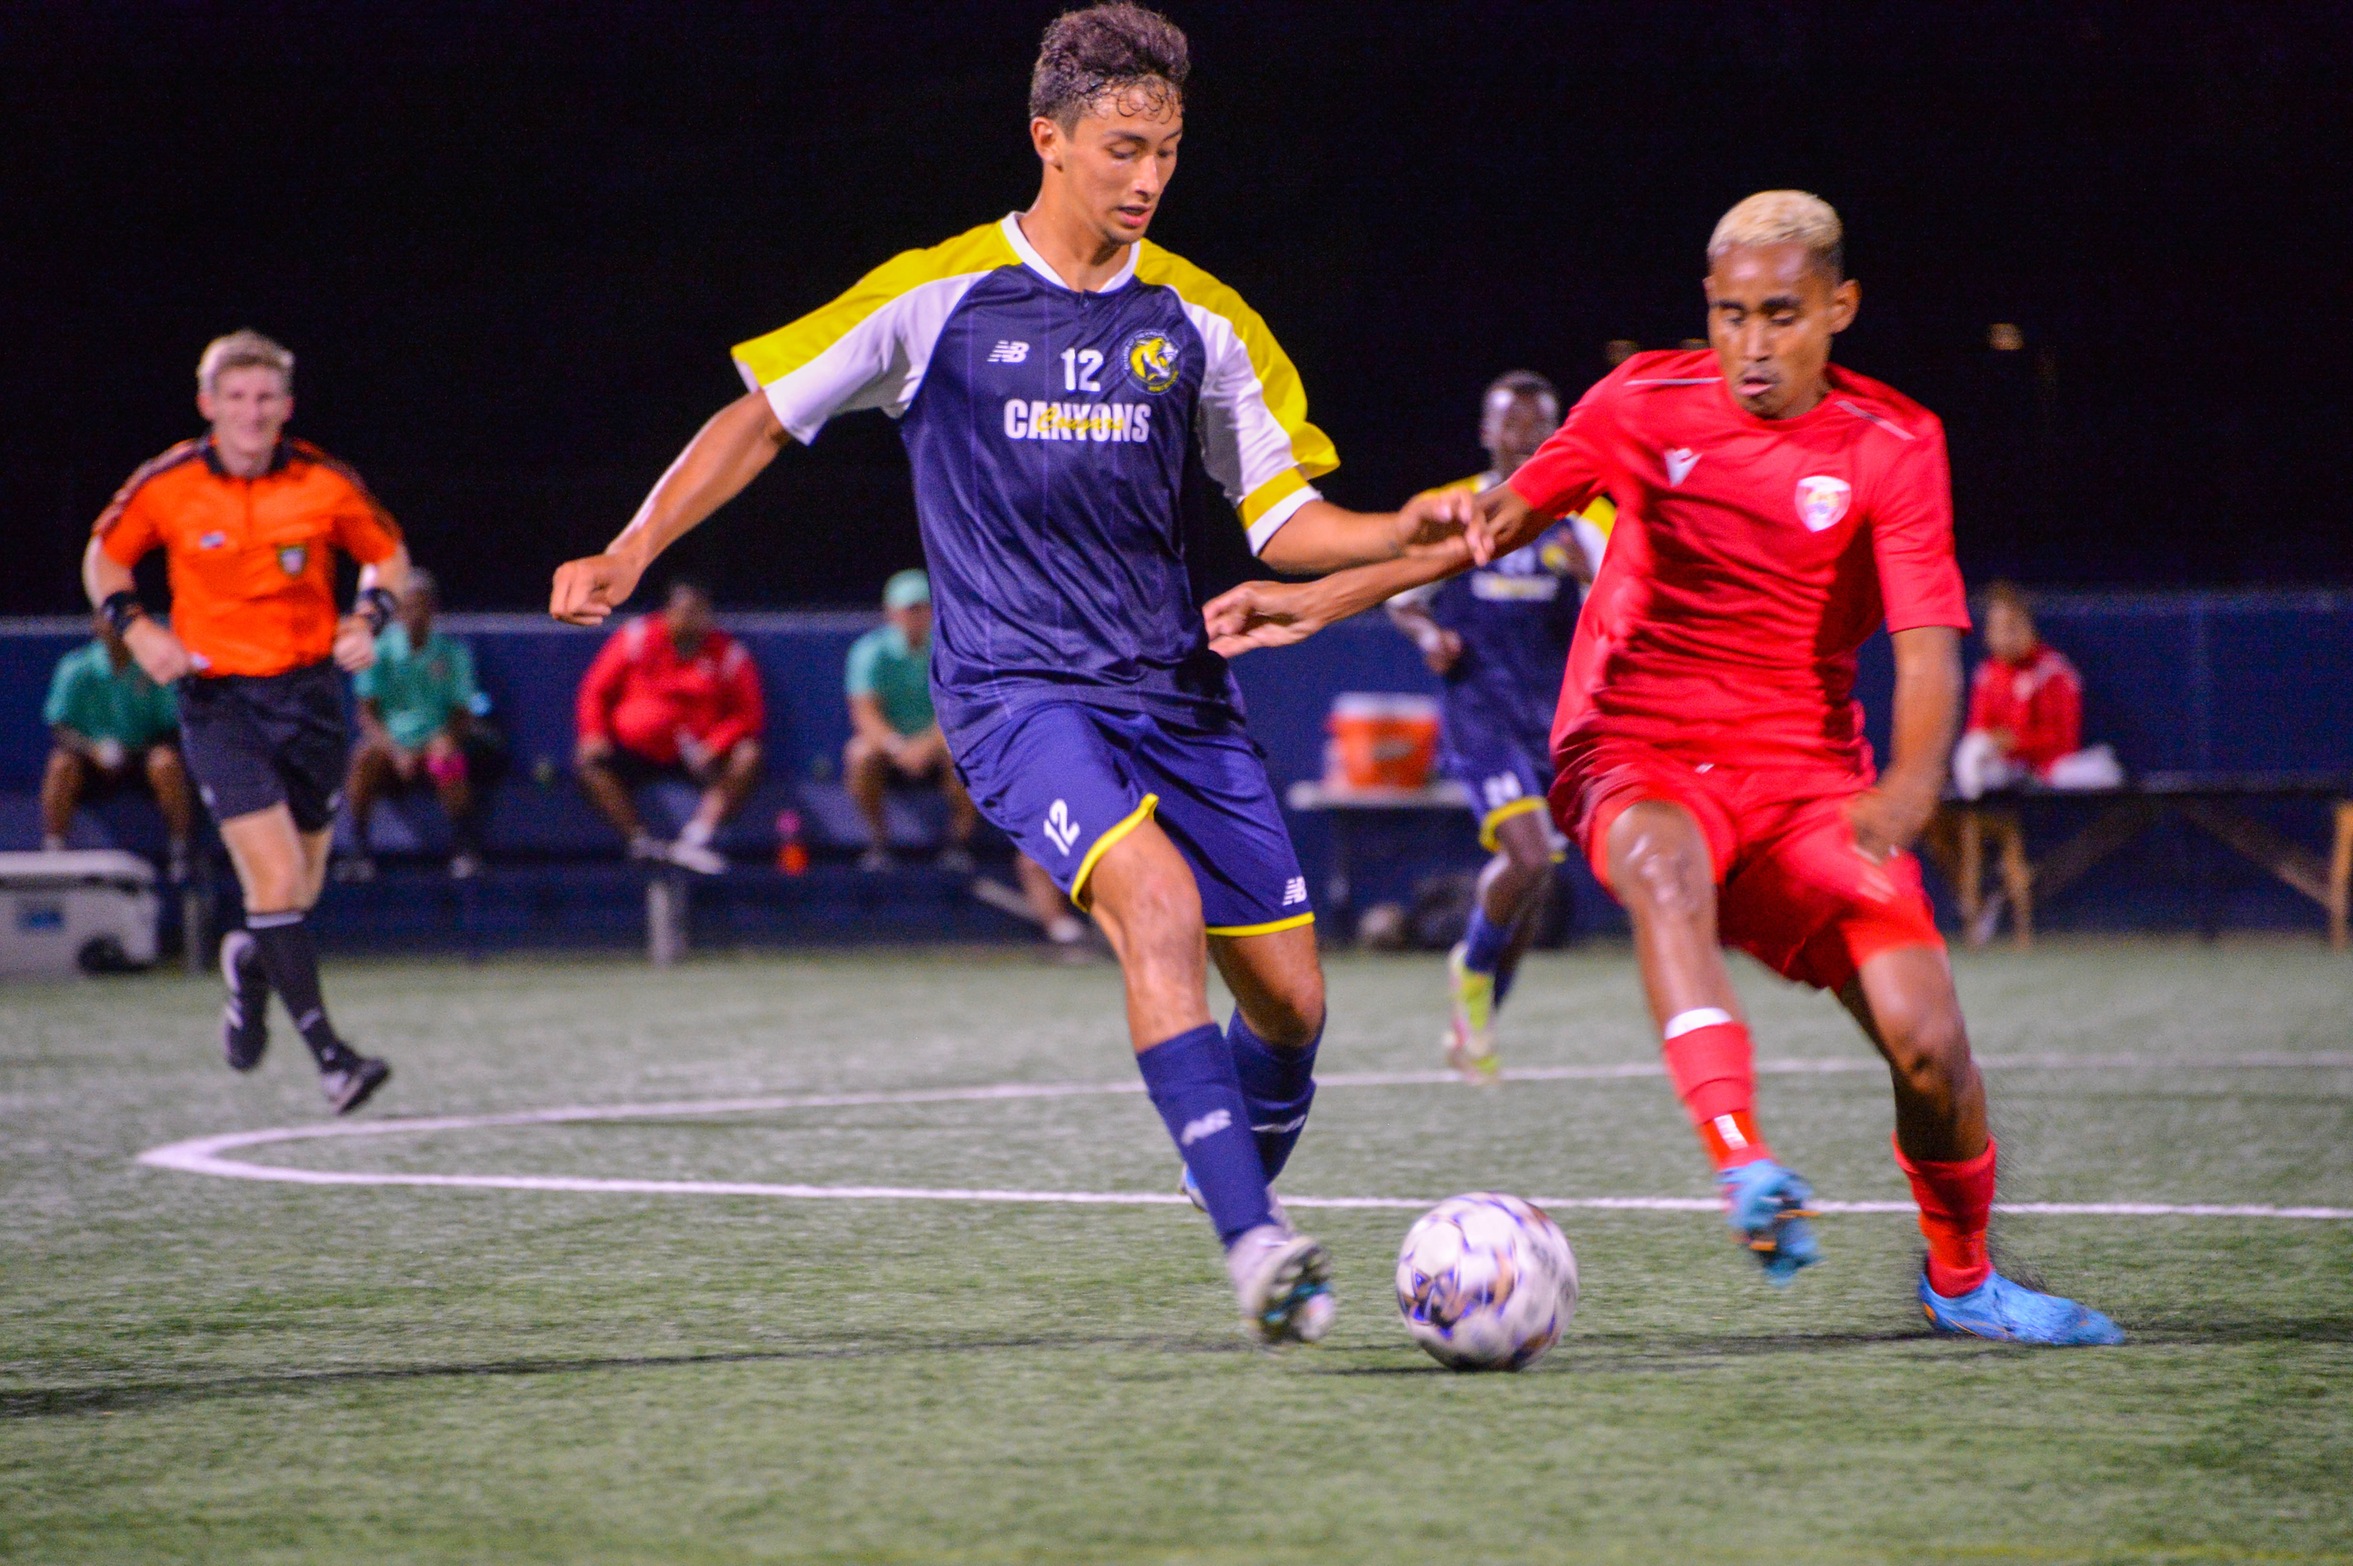 College of the Canyons men's soccer vs. Tahiti U20 National Team on Aug. 27, 2022.